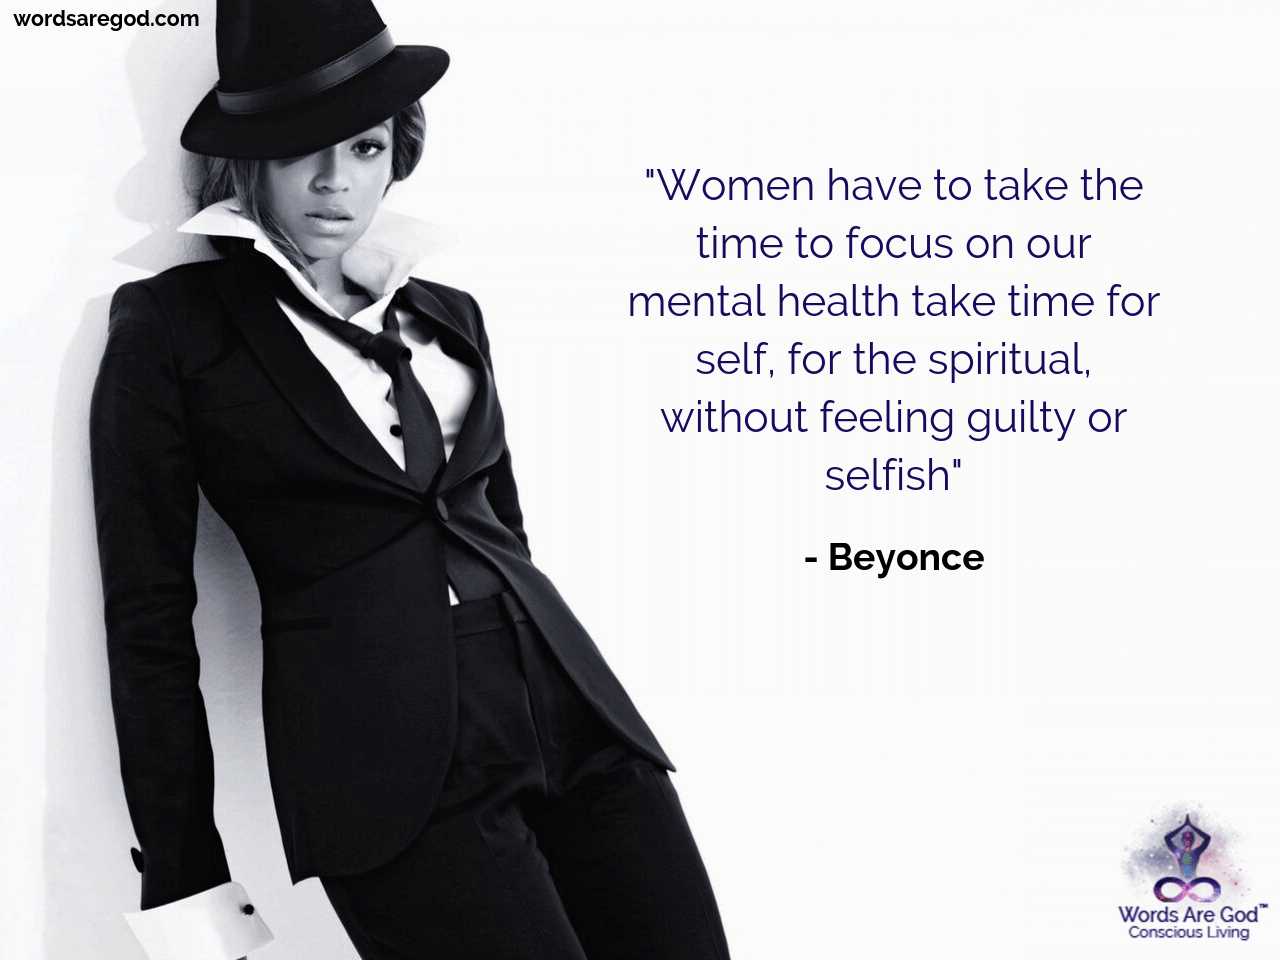 Beyonce Motivational Quote by Beyonce